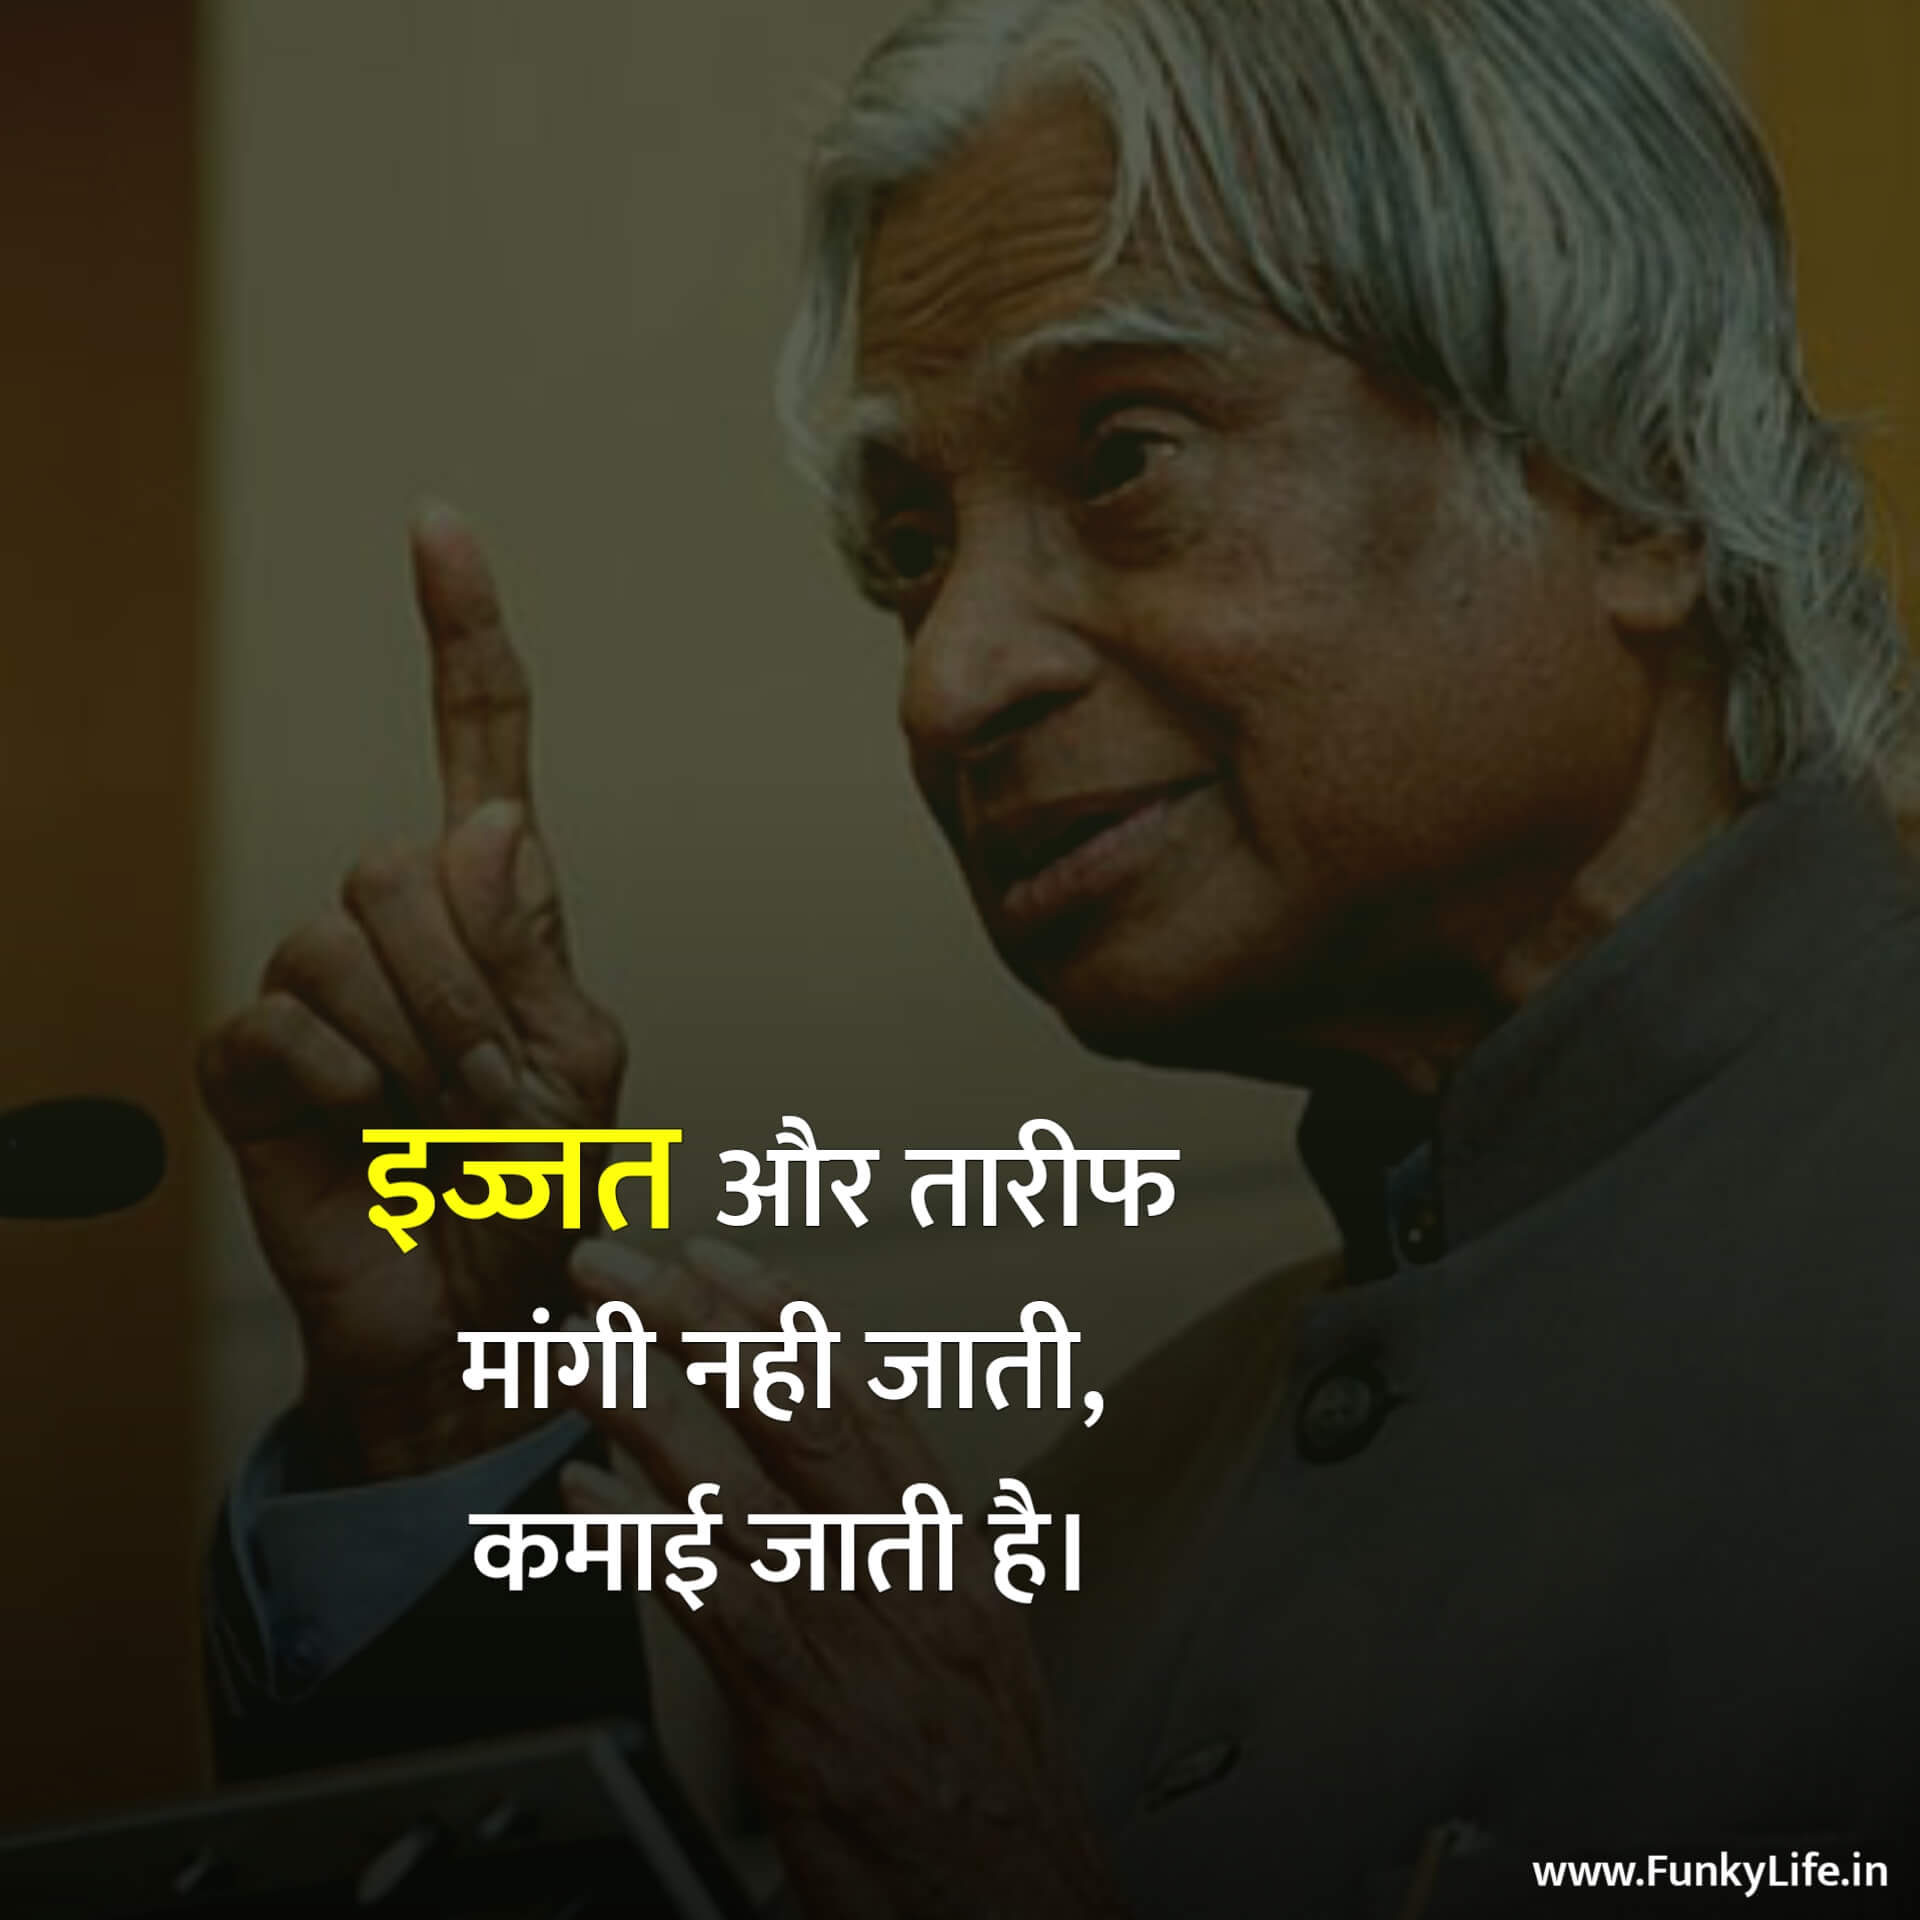 Motivational thought in Hindi